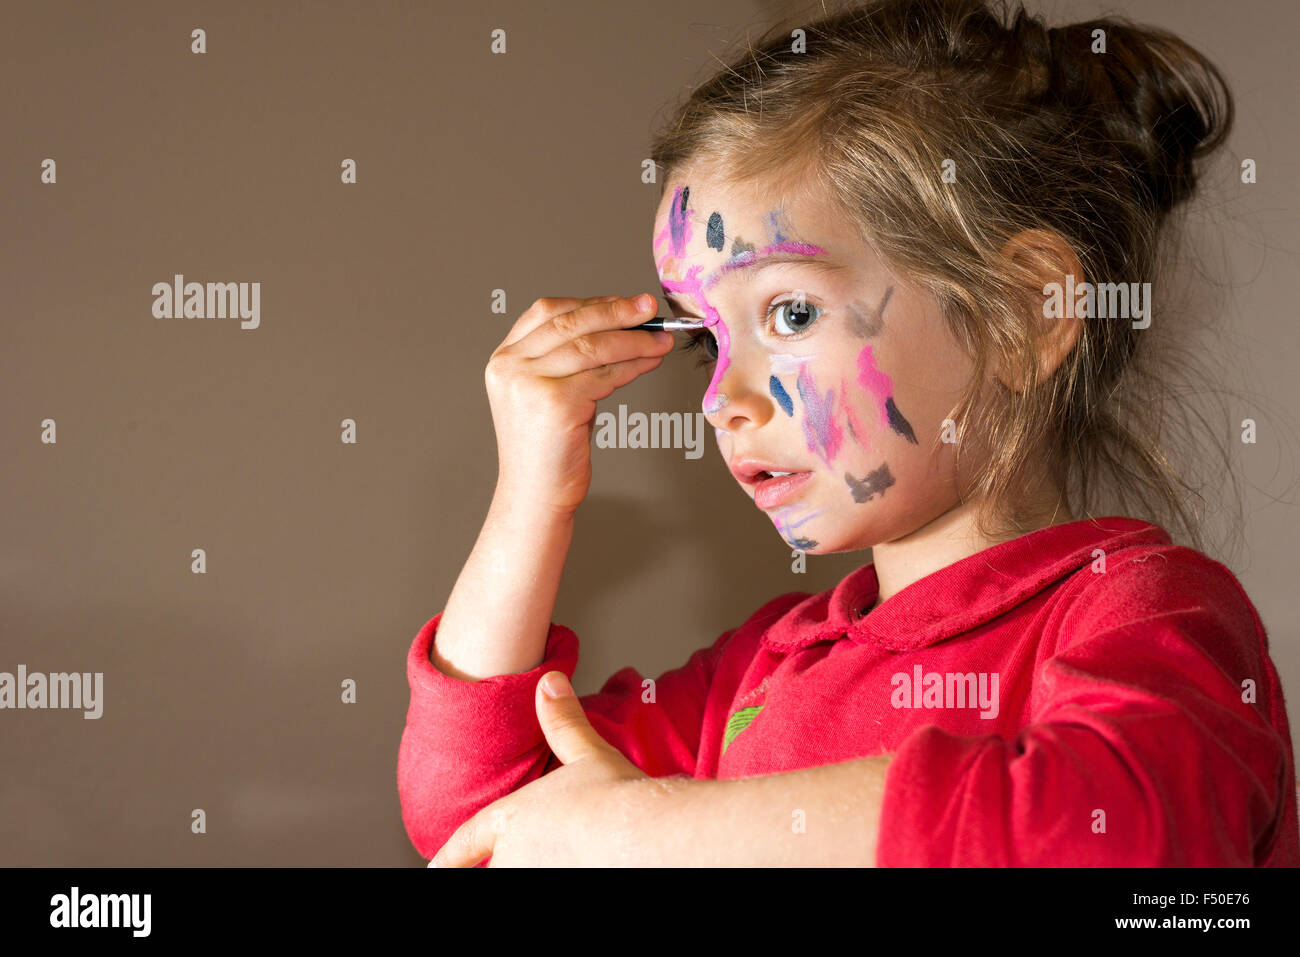 A little girl, wearing a red sweater, is painting her face with colorful watercolor Stock Photo